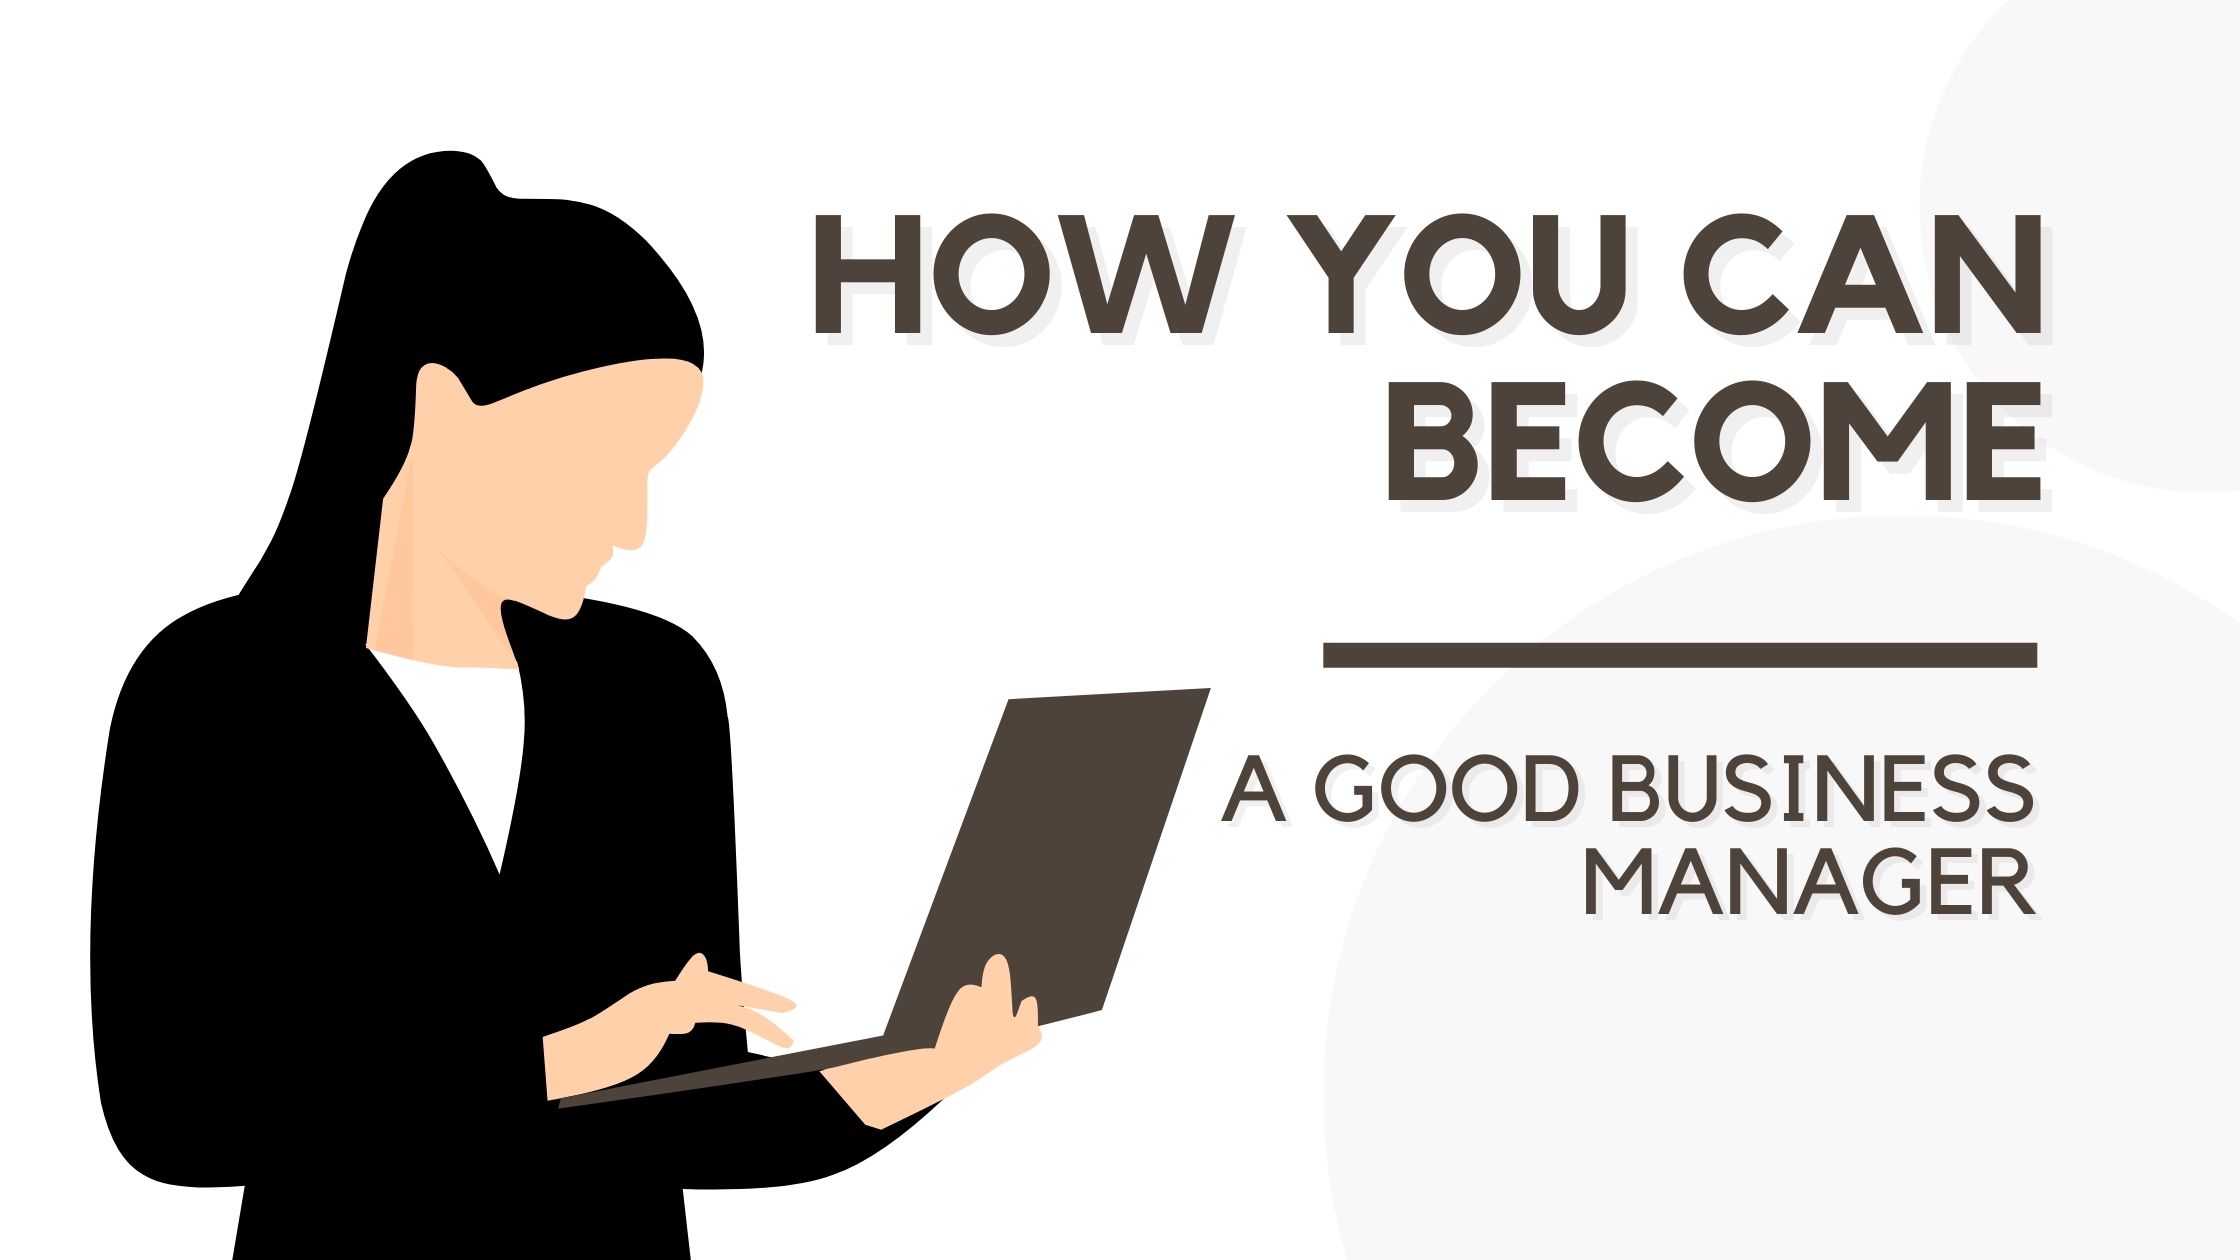 How You Can Become a Good Business Manager